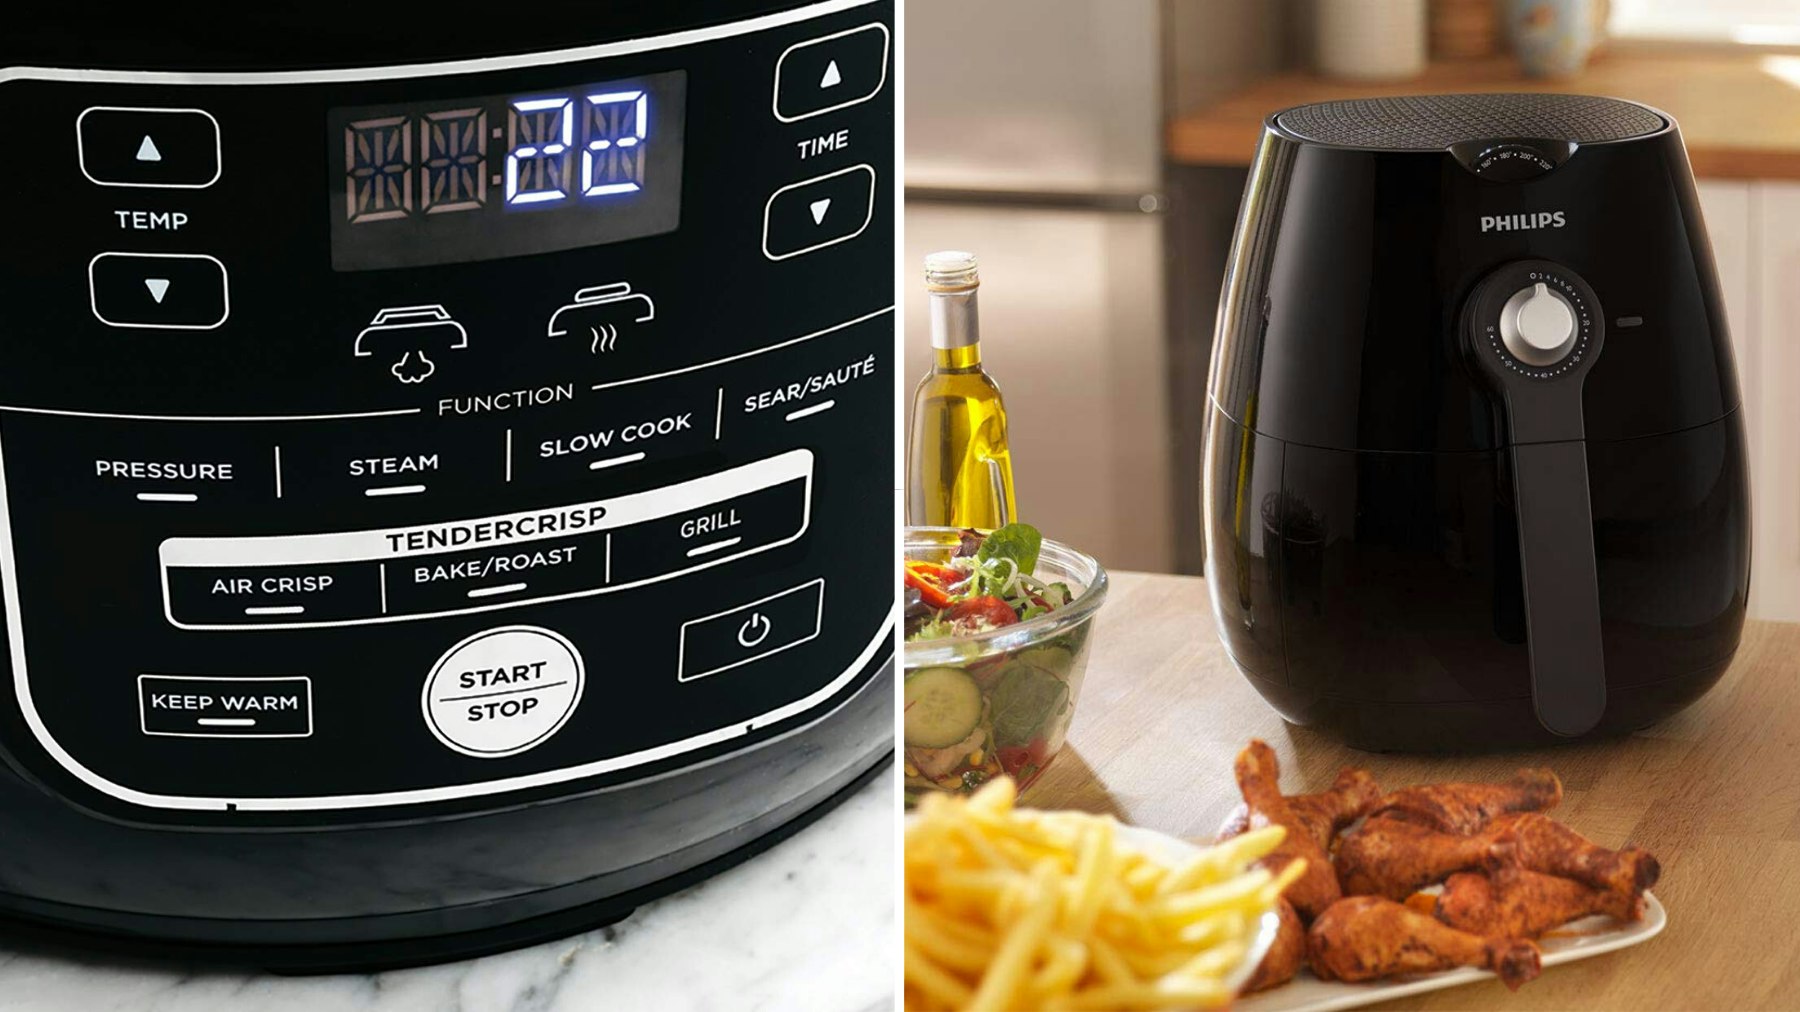 Tefal - With the Tefal EasyFry Grill & Steam, three technologies come  together in a single space-saving solution: an air fryer, a grill and a  steamer! Learn more:  -shop.com.au/collections/oil-less-air-fryers/products/tefal-easy-fry